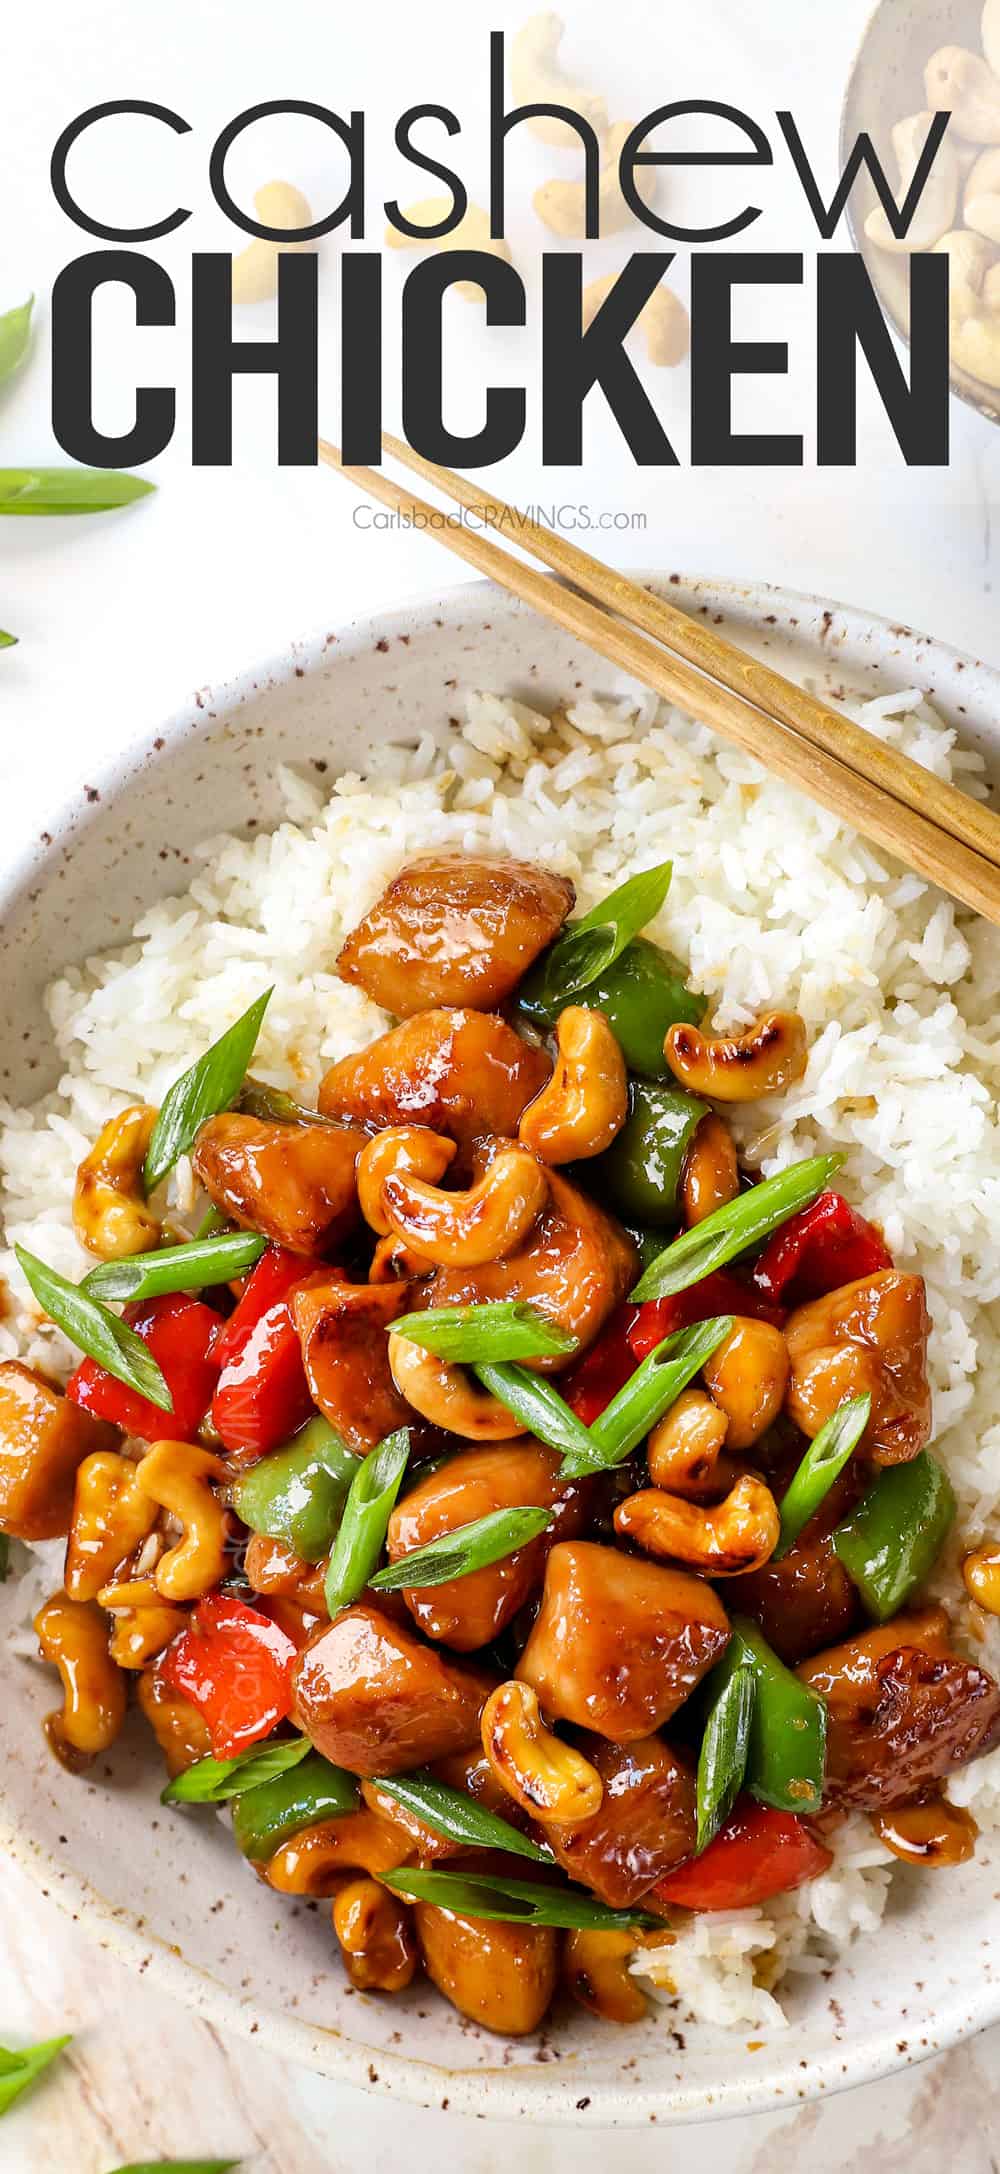 showing how to serve cashew chicken recipe on a white rice garnished with green onions